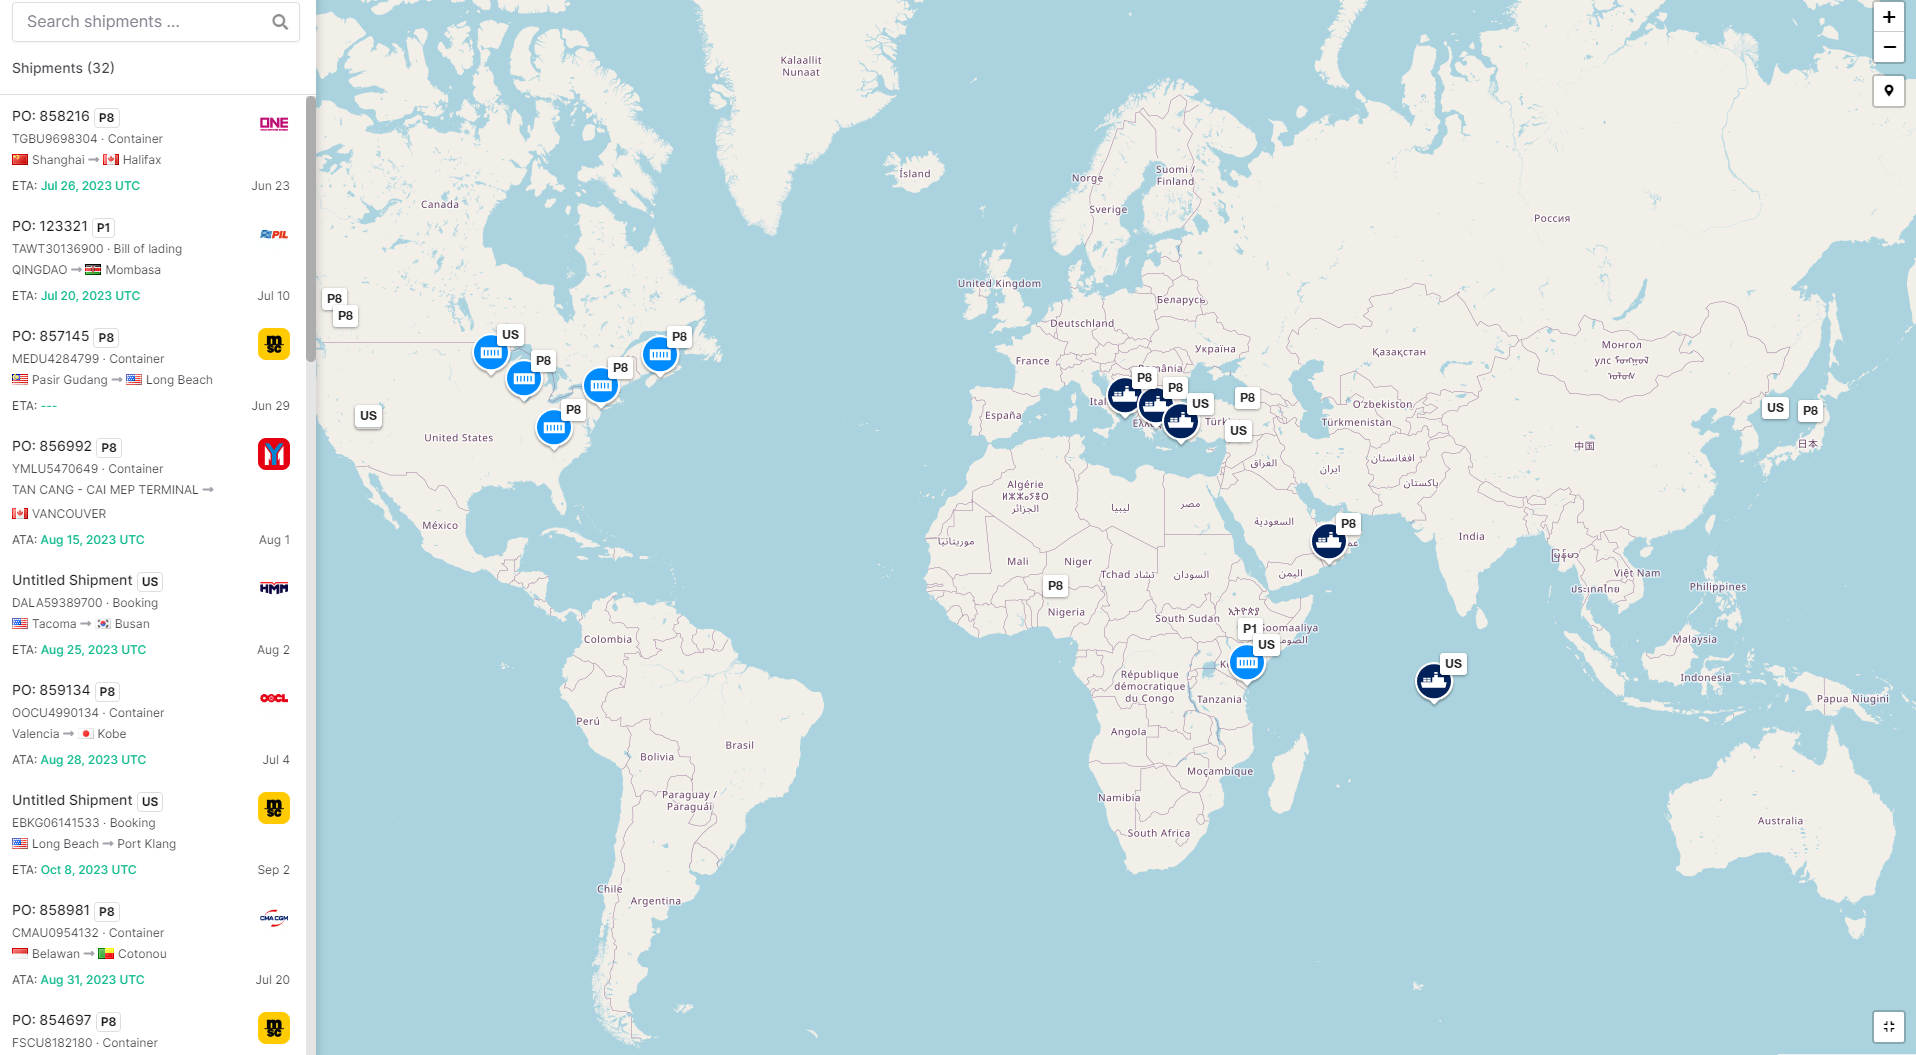 Interactive real-time map of shipments 